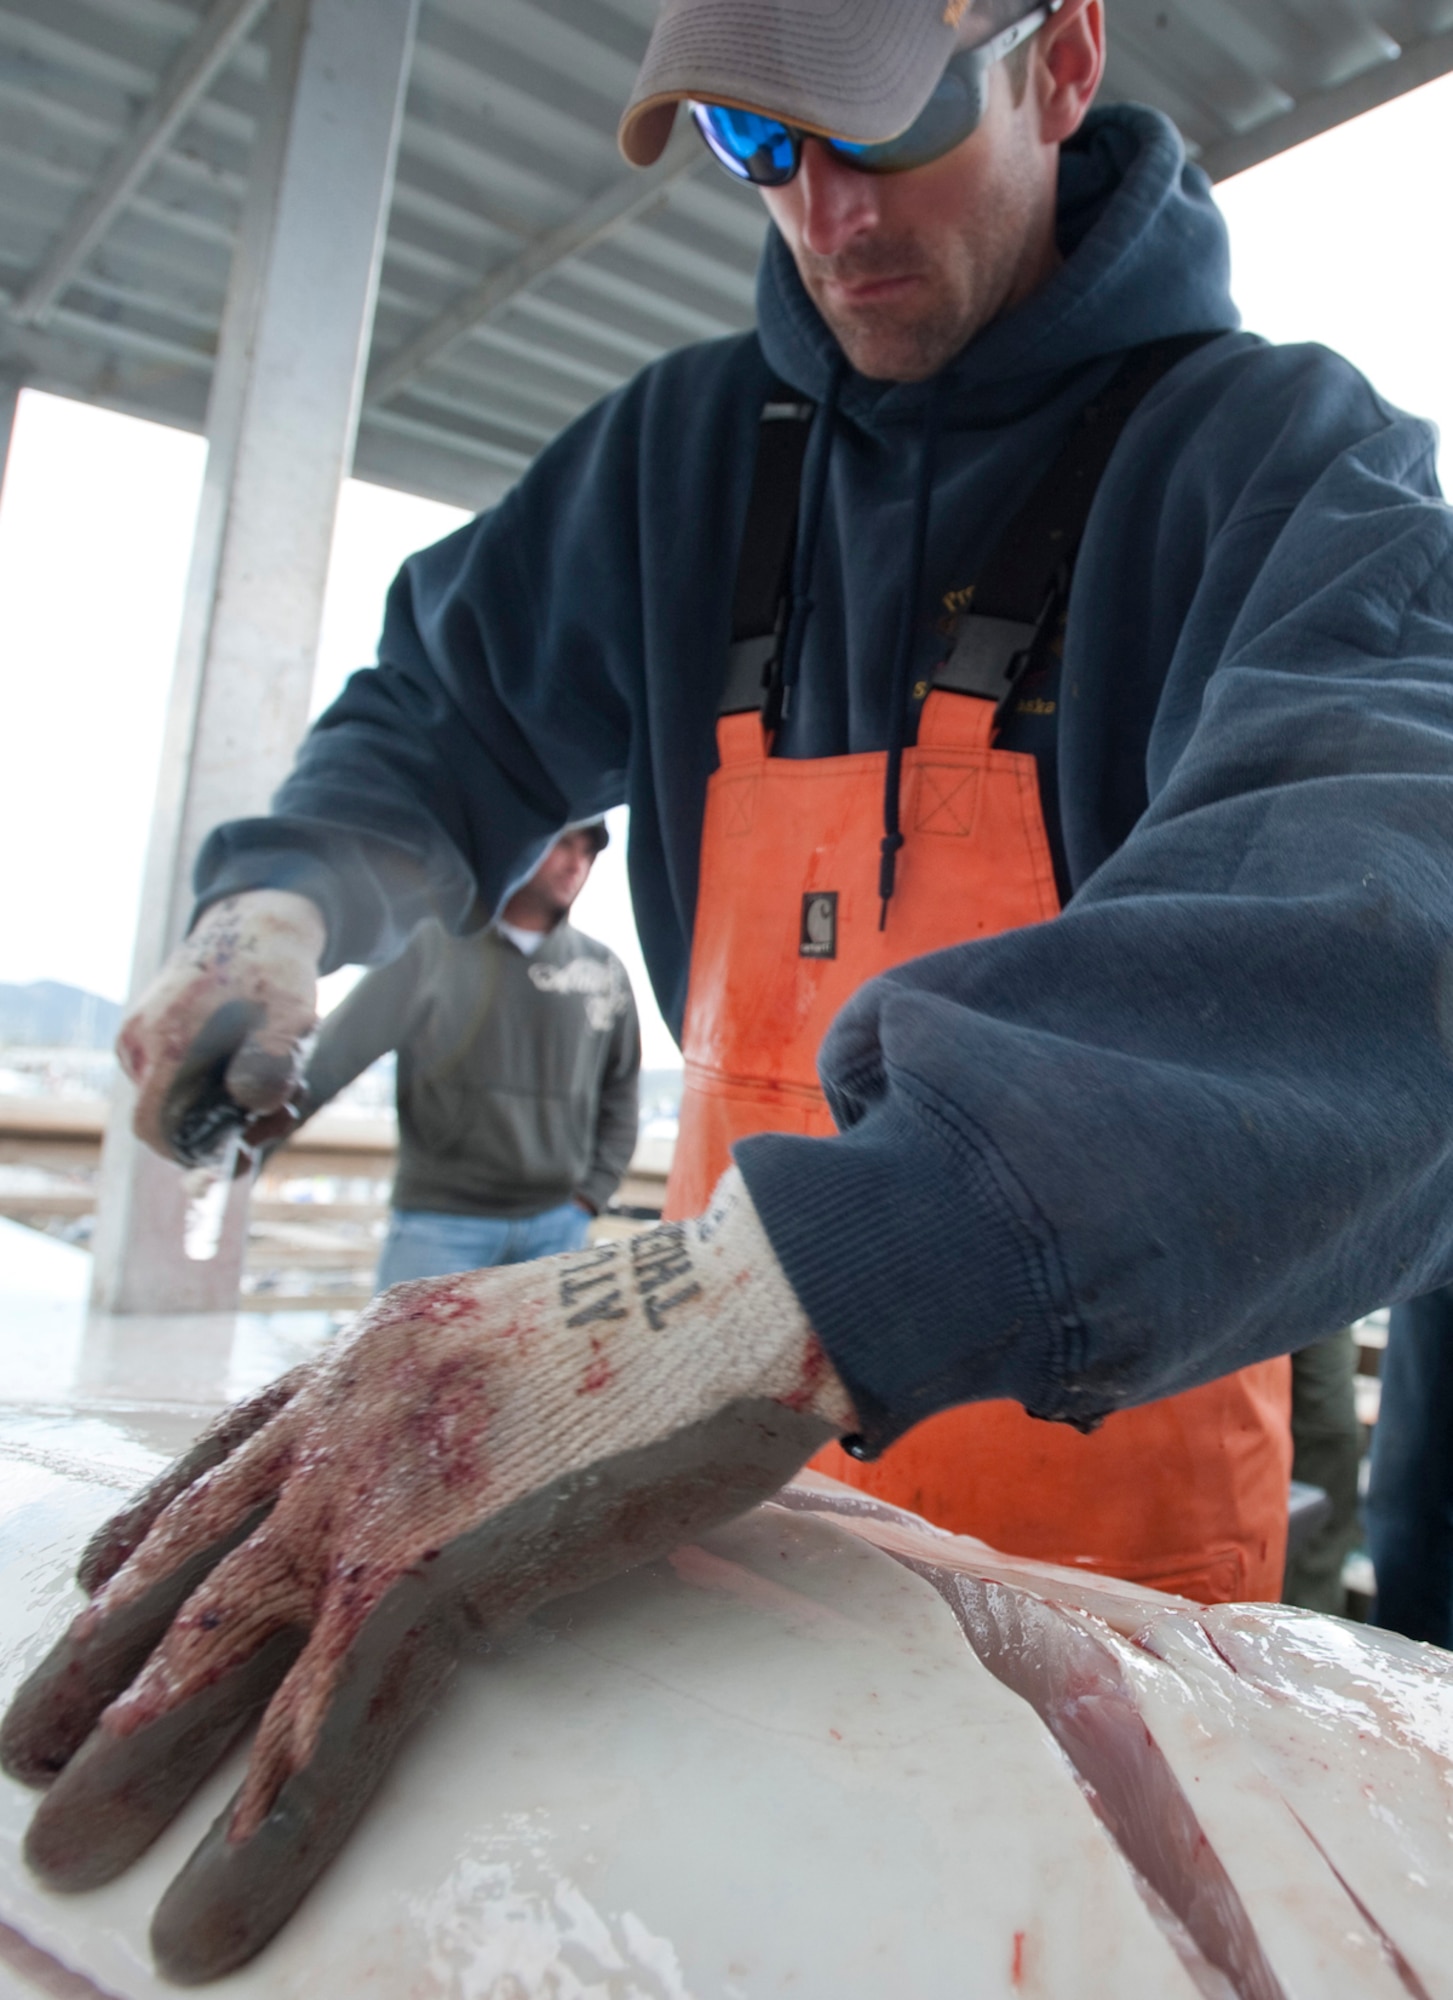 SEWARD, Alaska ? Nick Meadows, one of the many deckhands for the 5th Annual Combat Fishing Tournament fillets up a halibut May 26 during. For the fifth straight year the Seward Charter Association has dedicated a day to taking out military members serving in Alaska to a day of fishing. This year approximately 275 veterans participated in the tournament. (U.S. Air Force photo/Senior Airman Christopher Gross)